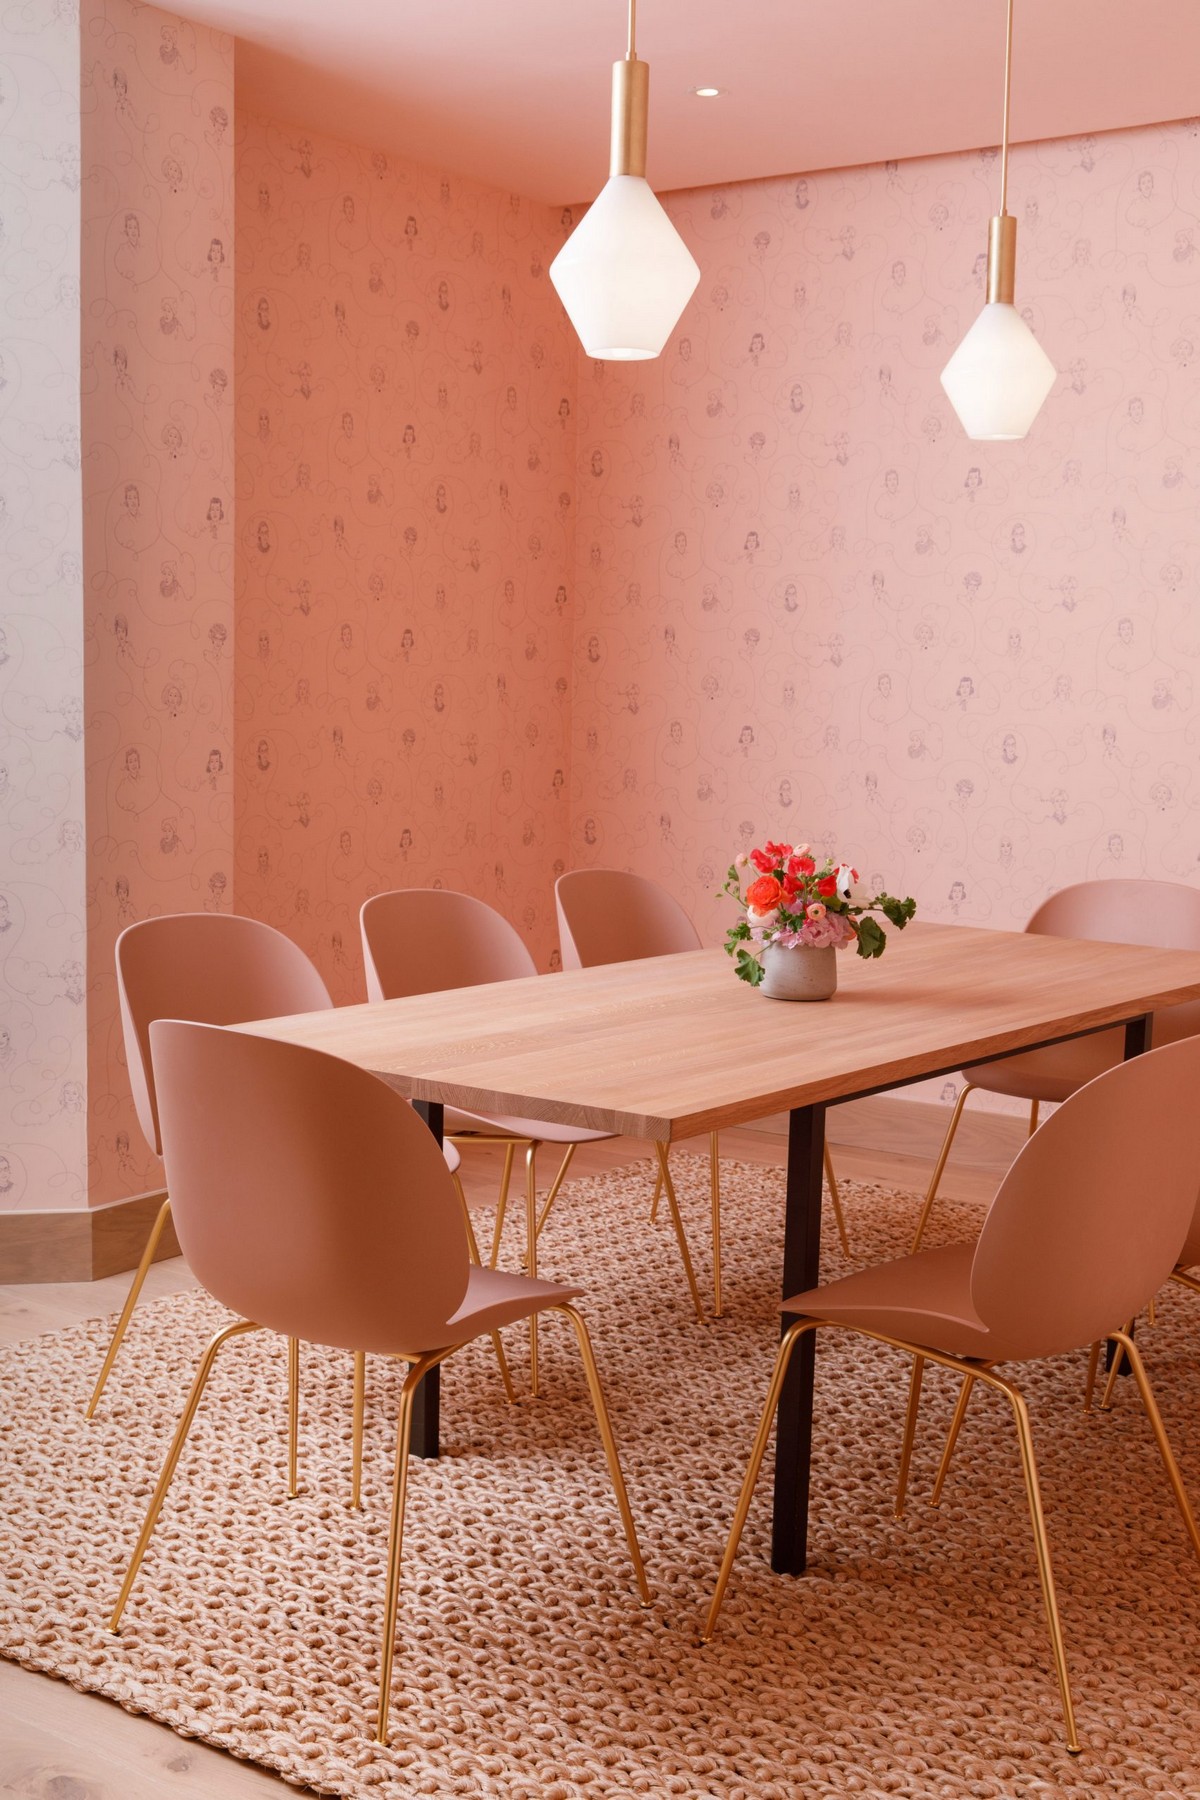 The Wing: The Best Place for Hard Working Females | Chiara De Rege, an interior designer made an excellent job when creating a cozy atmosphere at the Brooklyn location of The Wing. #coworking #femaleemporwement #womens #interiordesign #workspace